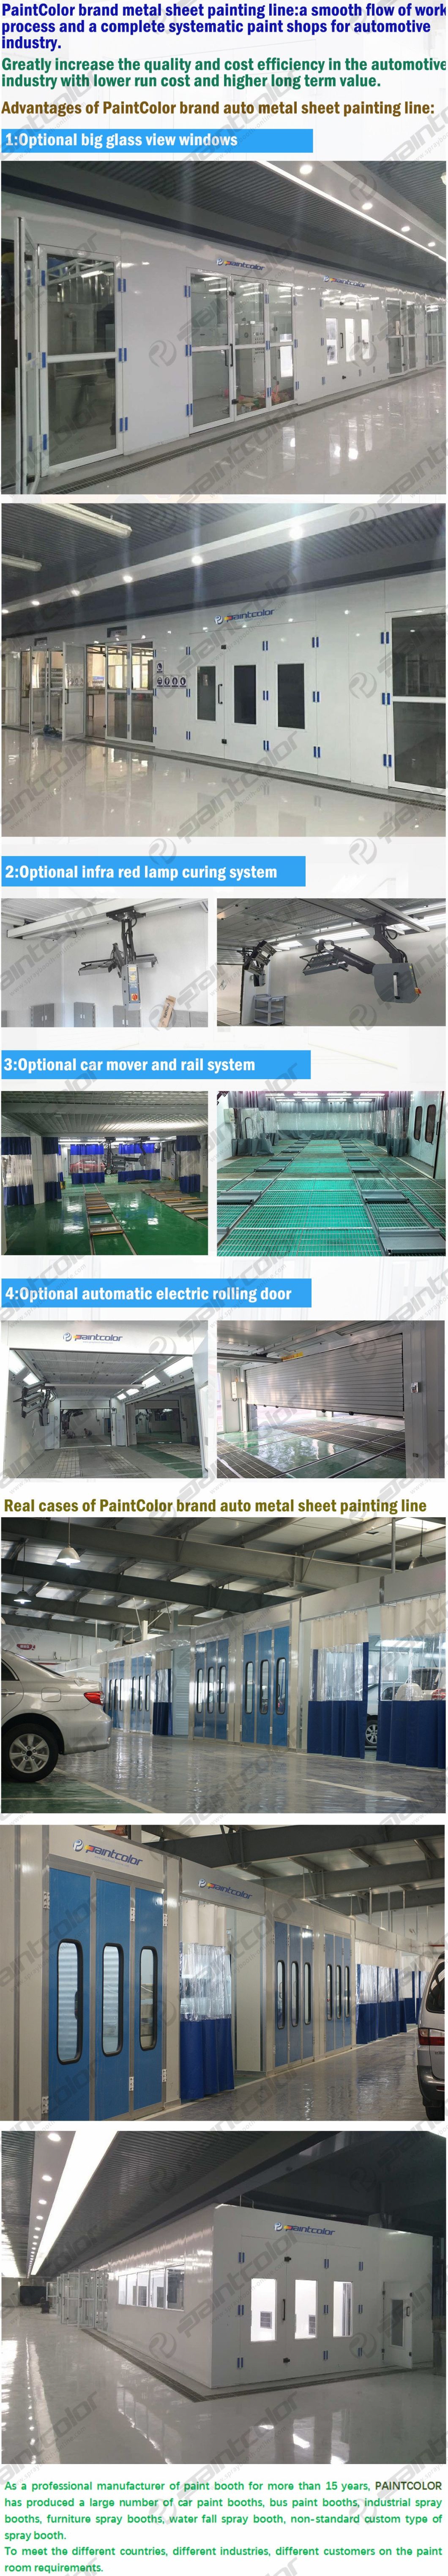 Sheet Metal Paint Line Multi Booth Car Spray Paint Booth Production Line Paintcolor Brand